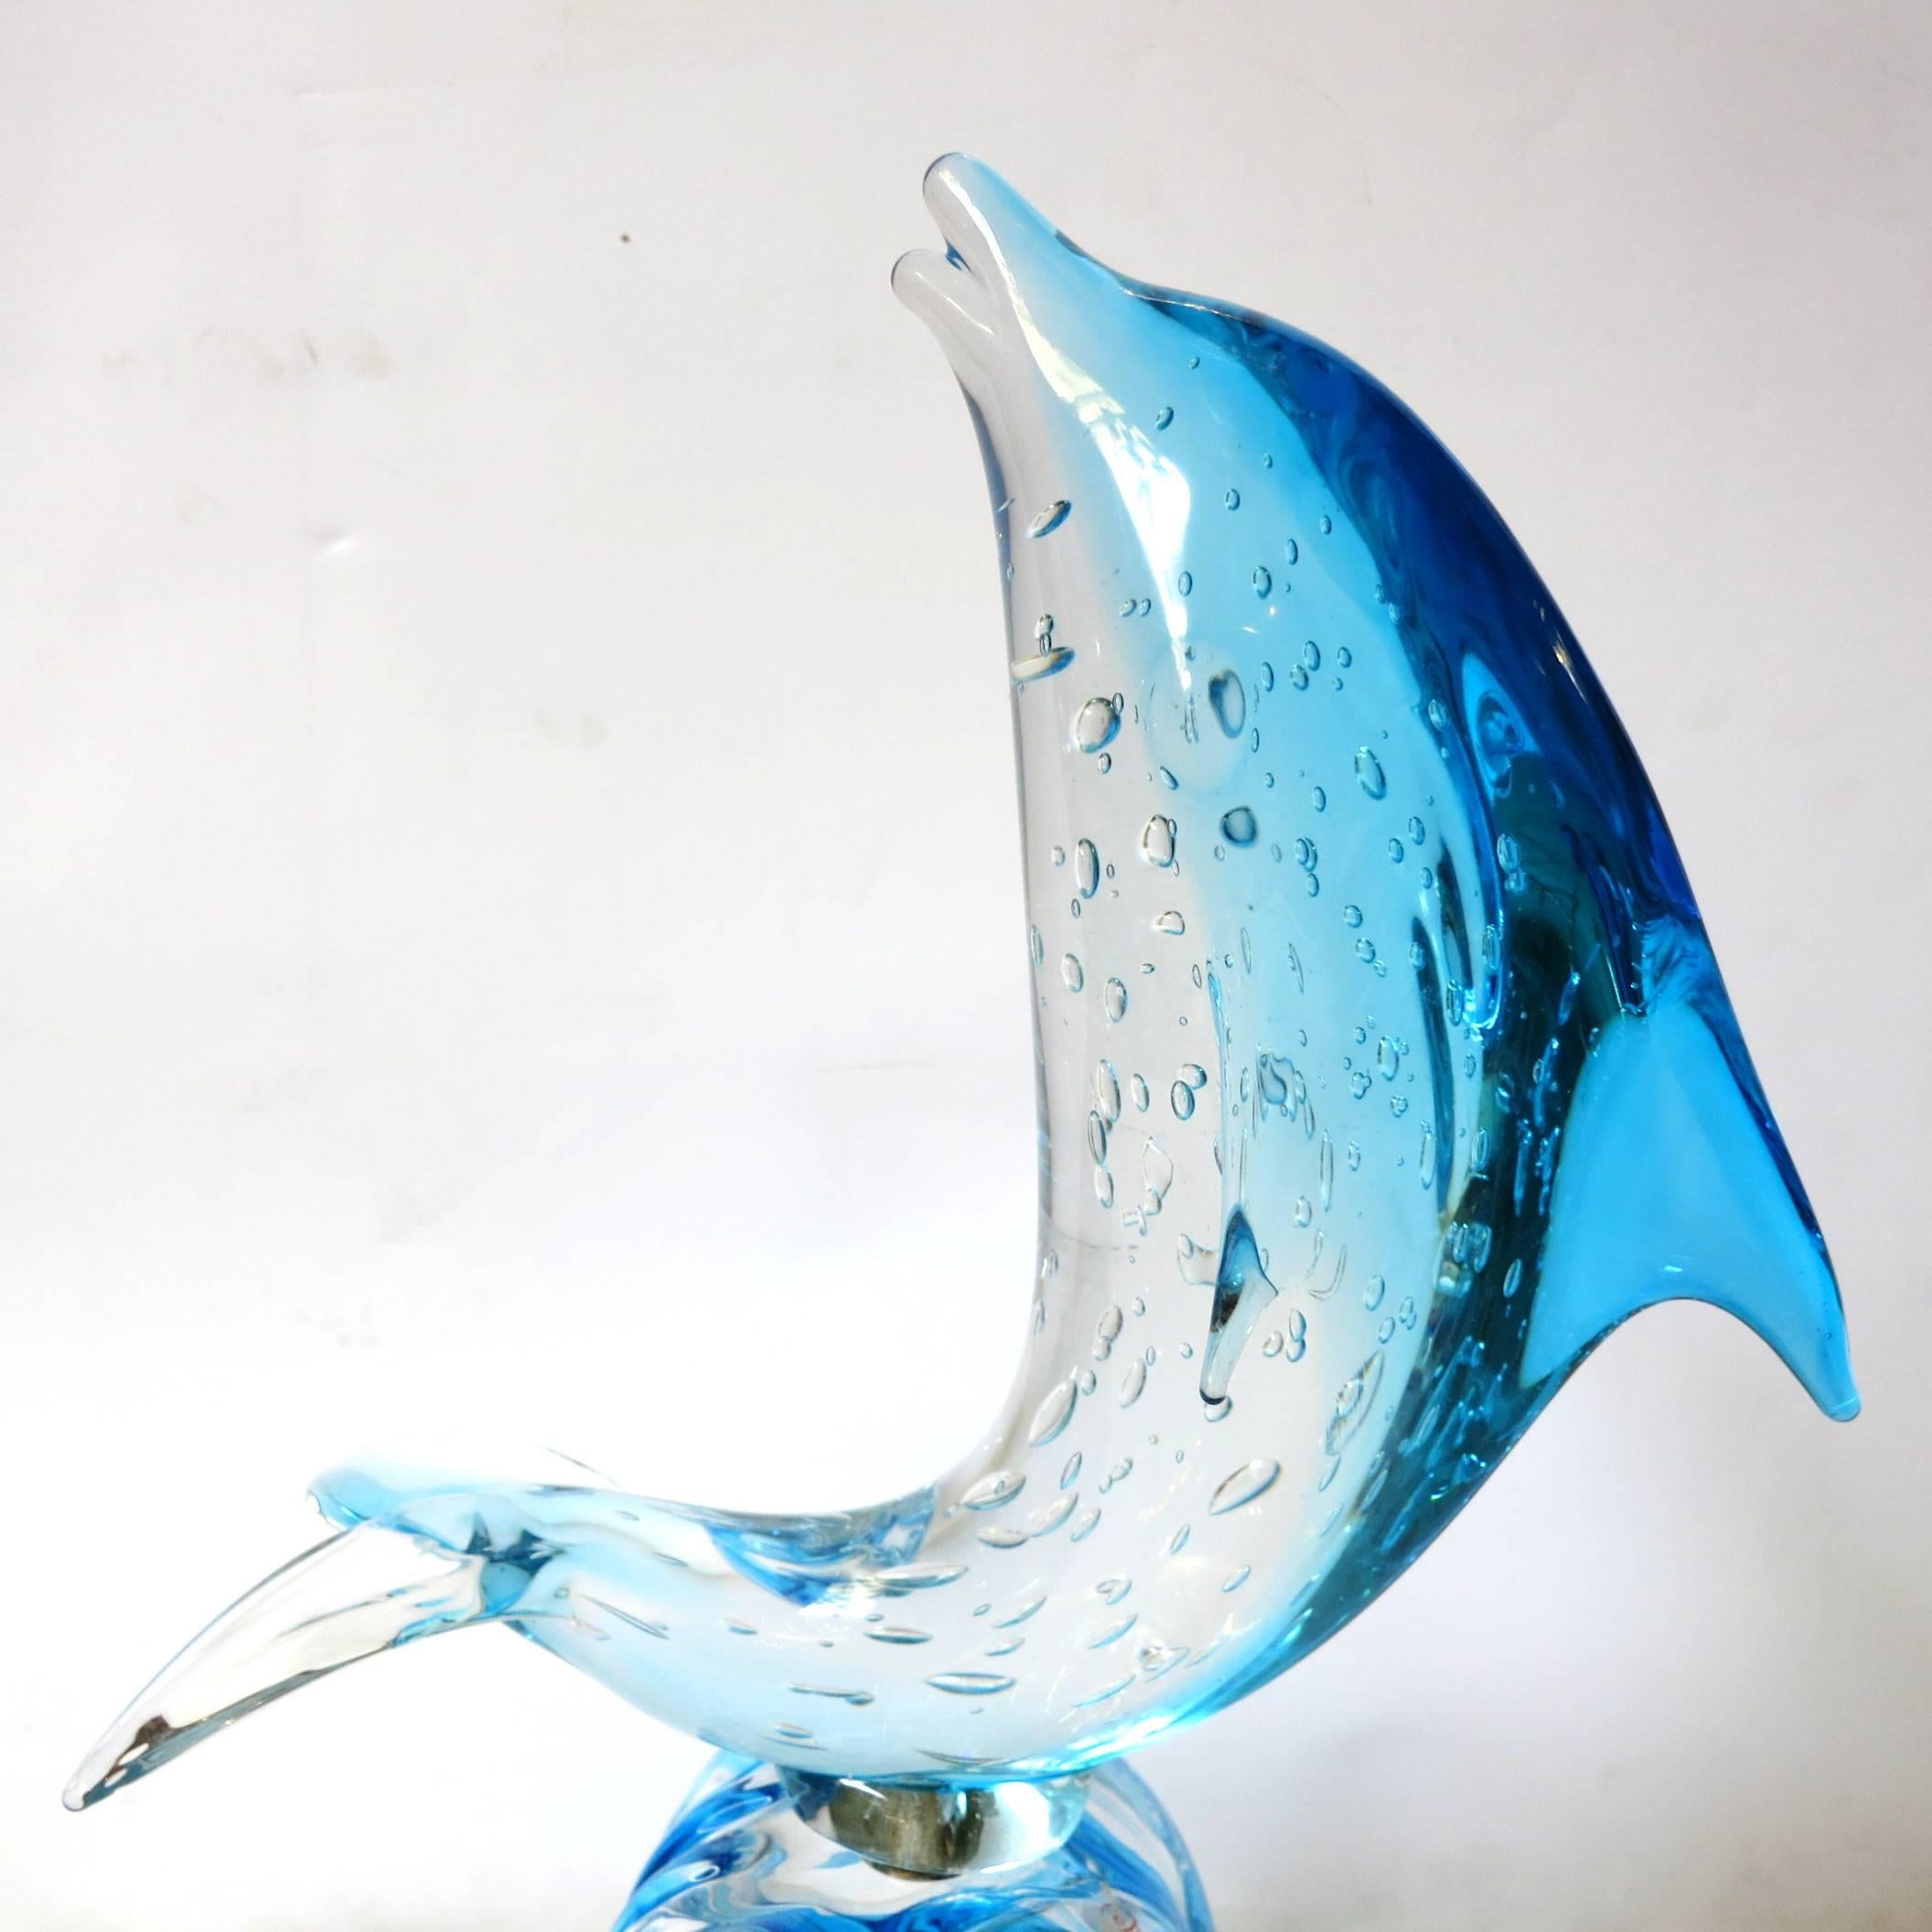 Dolphin on Wave Murano Glass Sculpture by Sergio Costantini (Moderne)